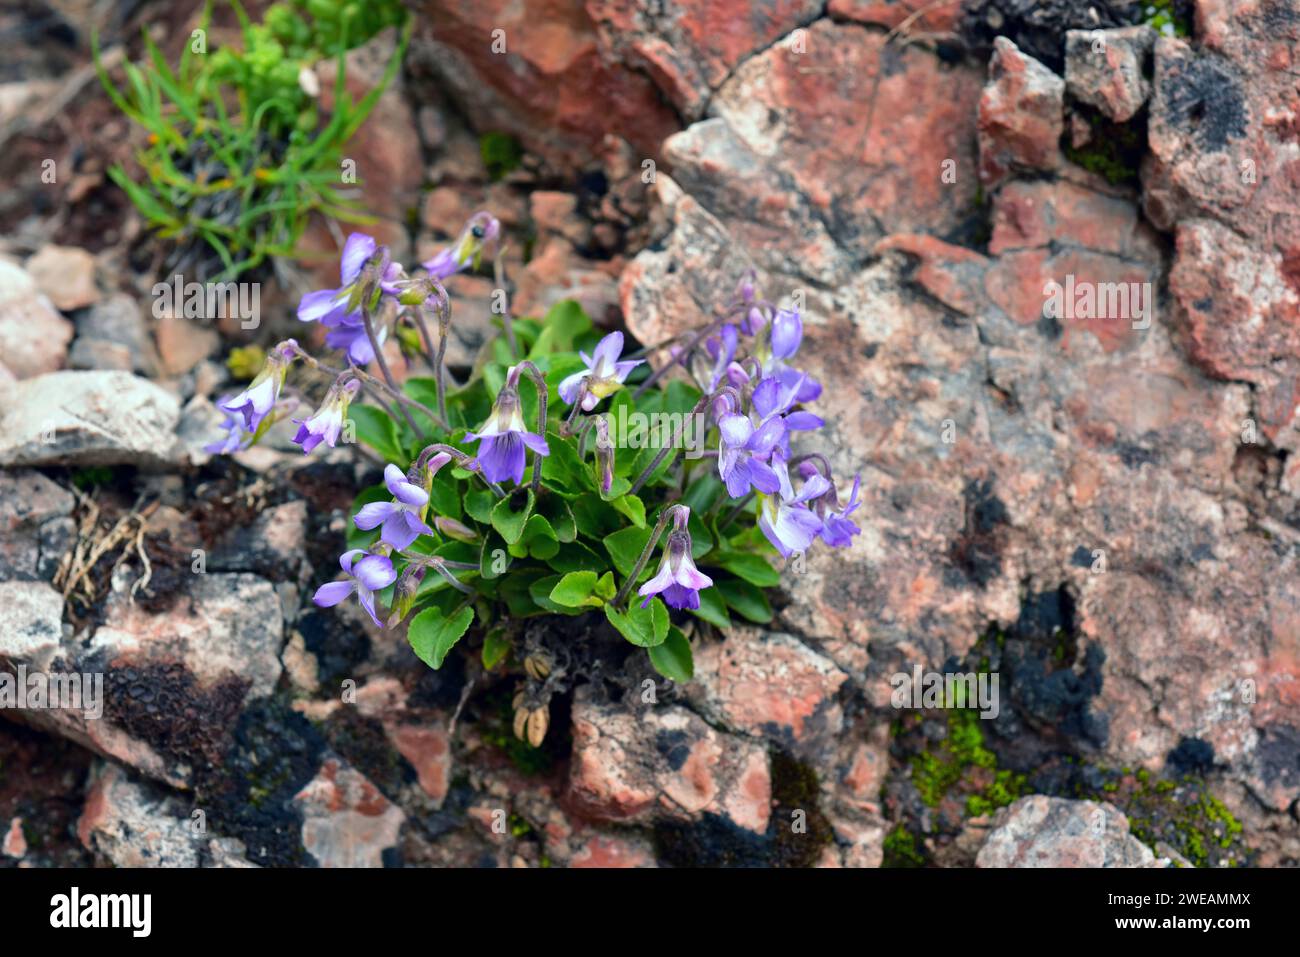 Early dog-violet (Viola reichenbachiana) is a perennial herb native to Europe. This photo was taken in Somiedo Natural Park, Asturias, Spain. Stock Photo